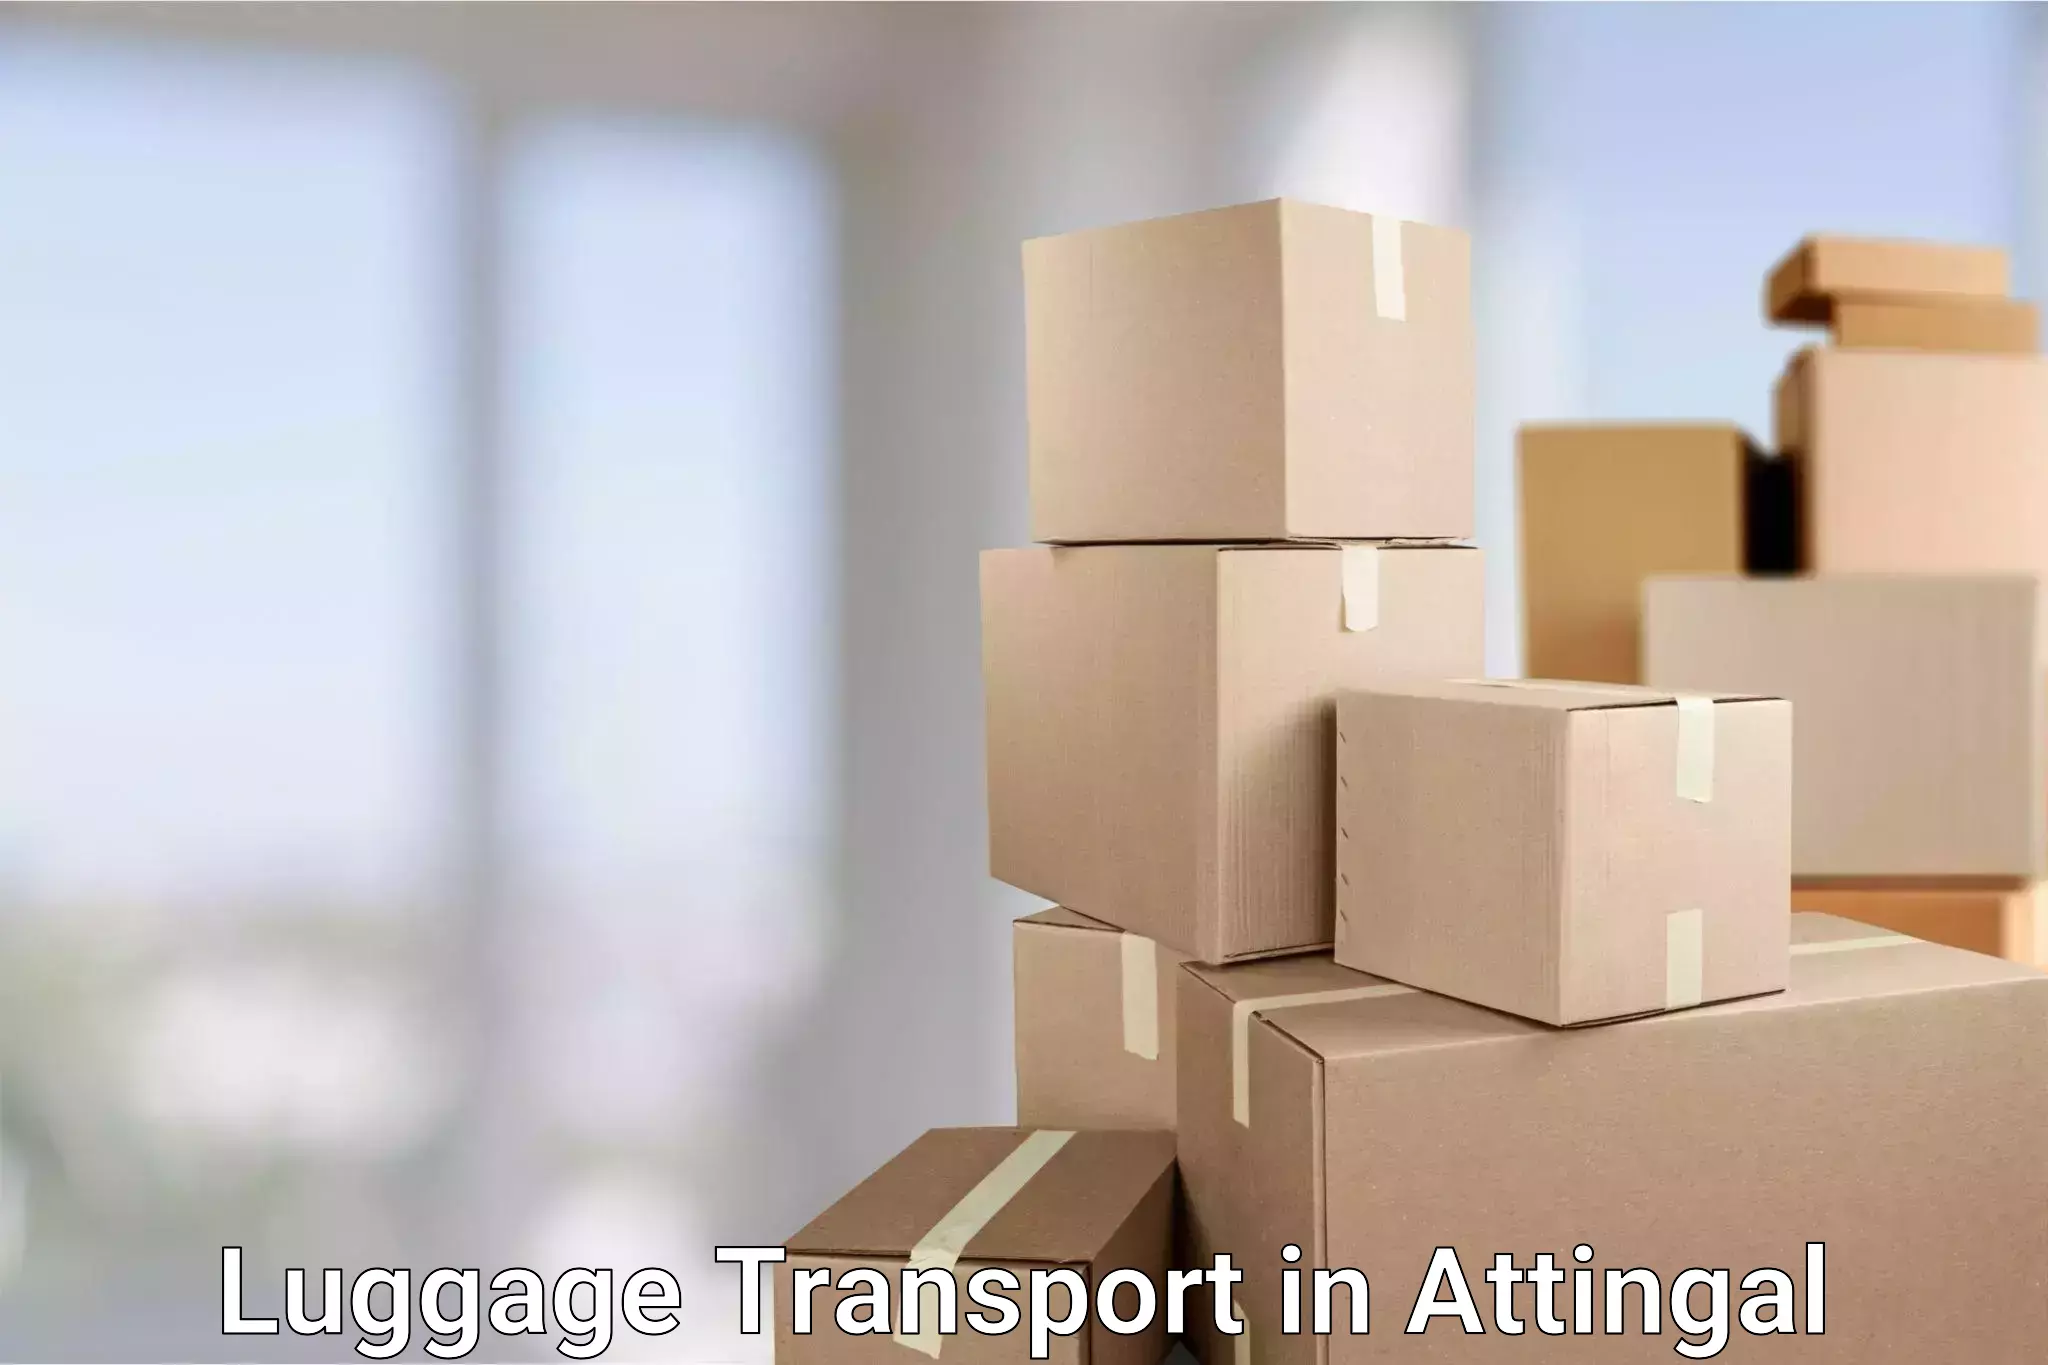 Luggage transport consulting in Attingal